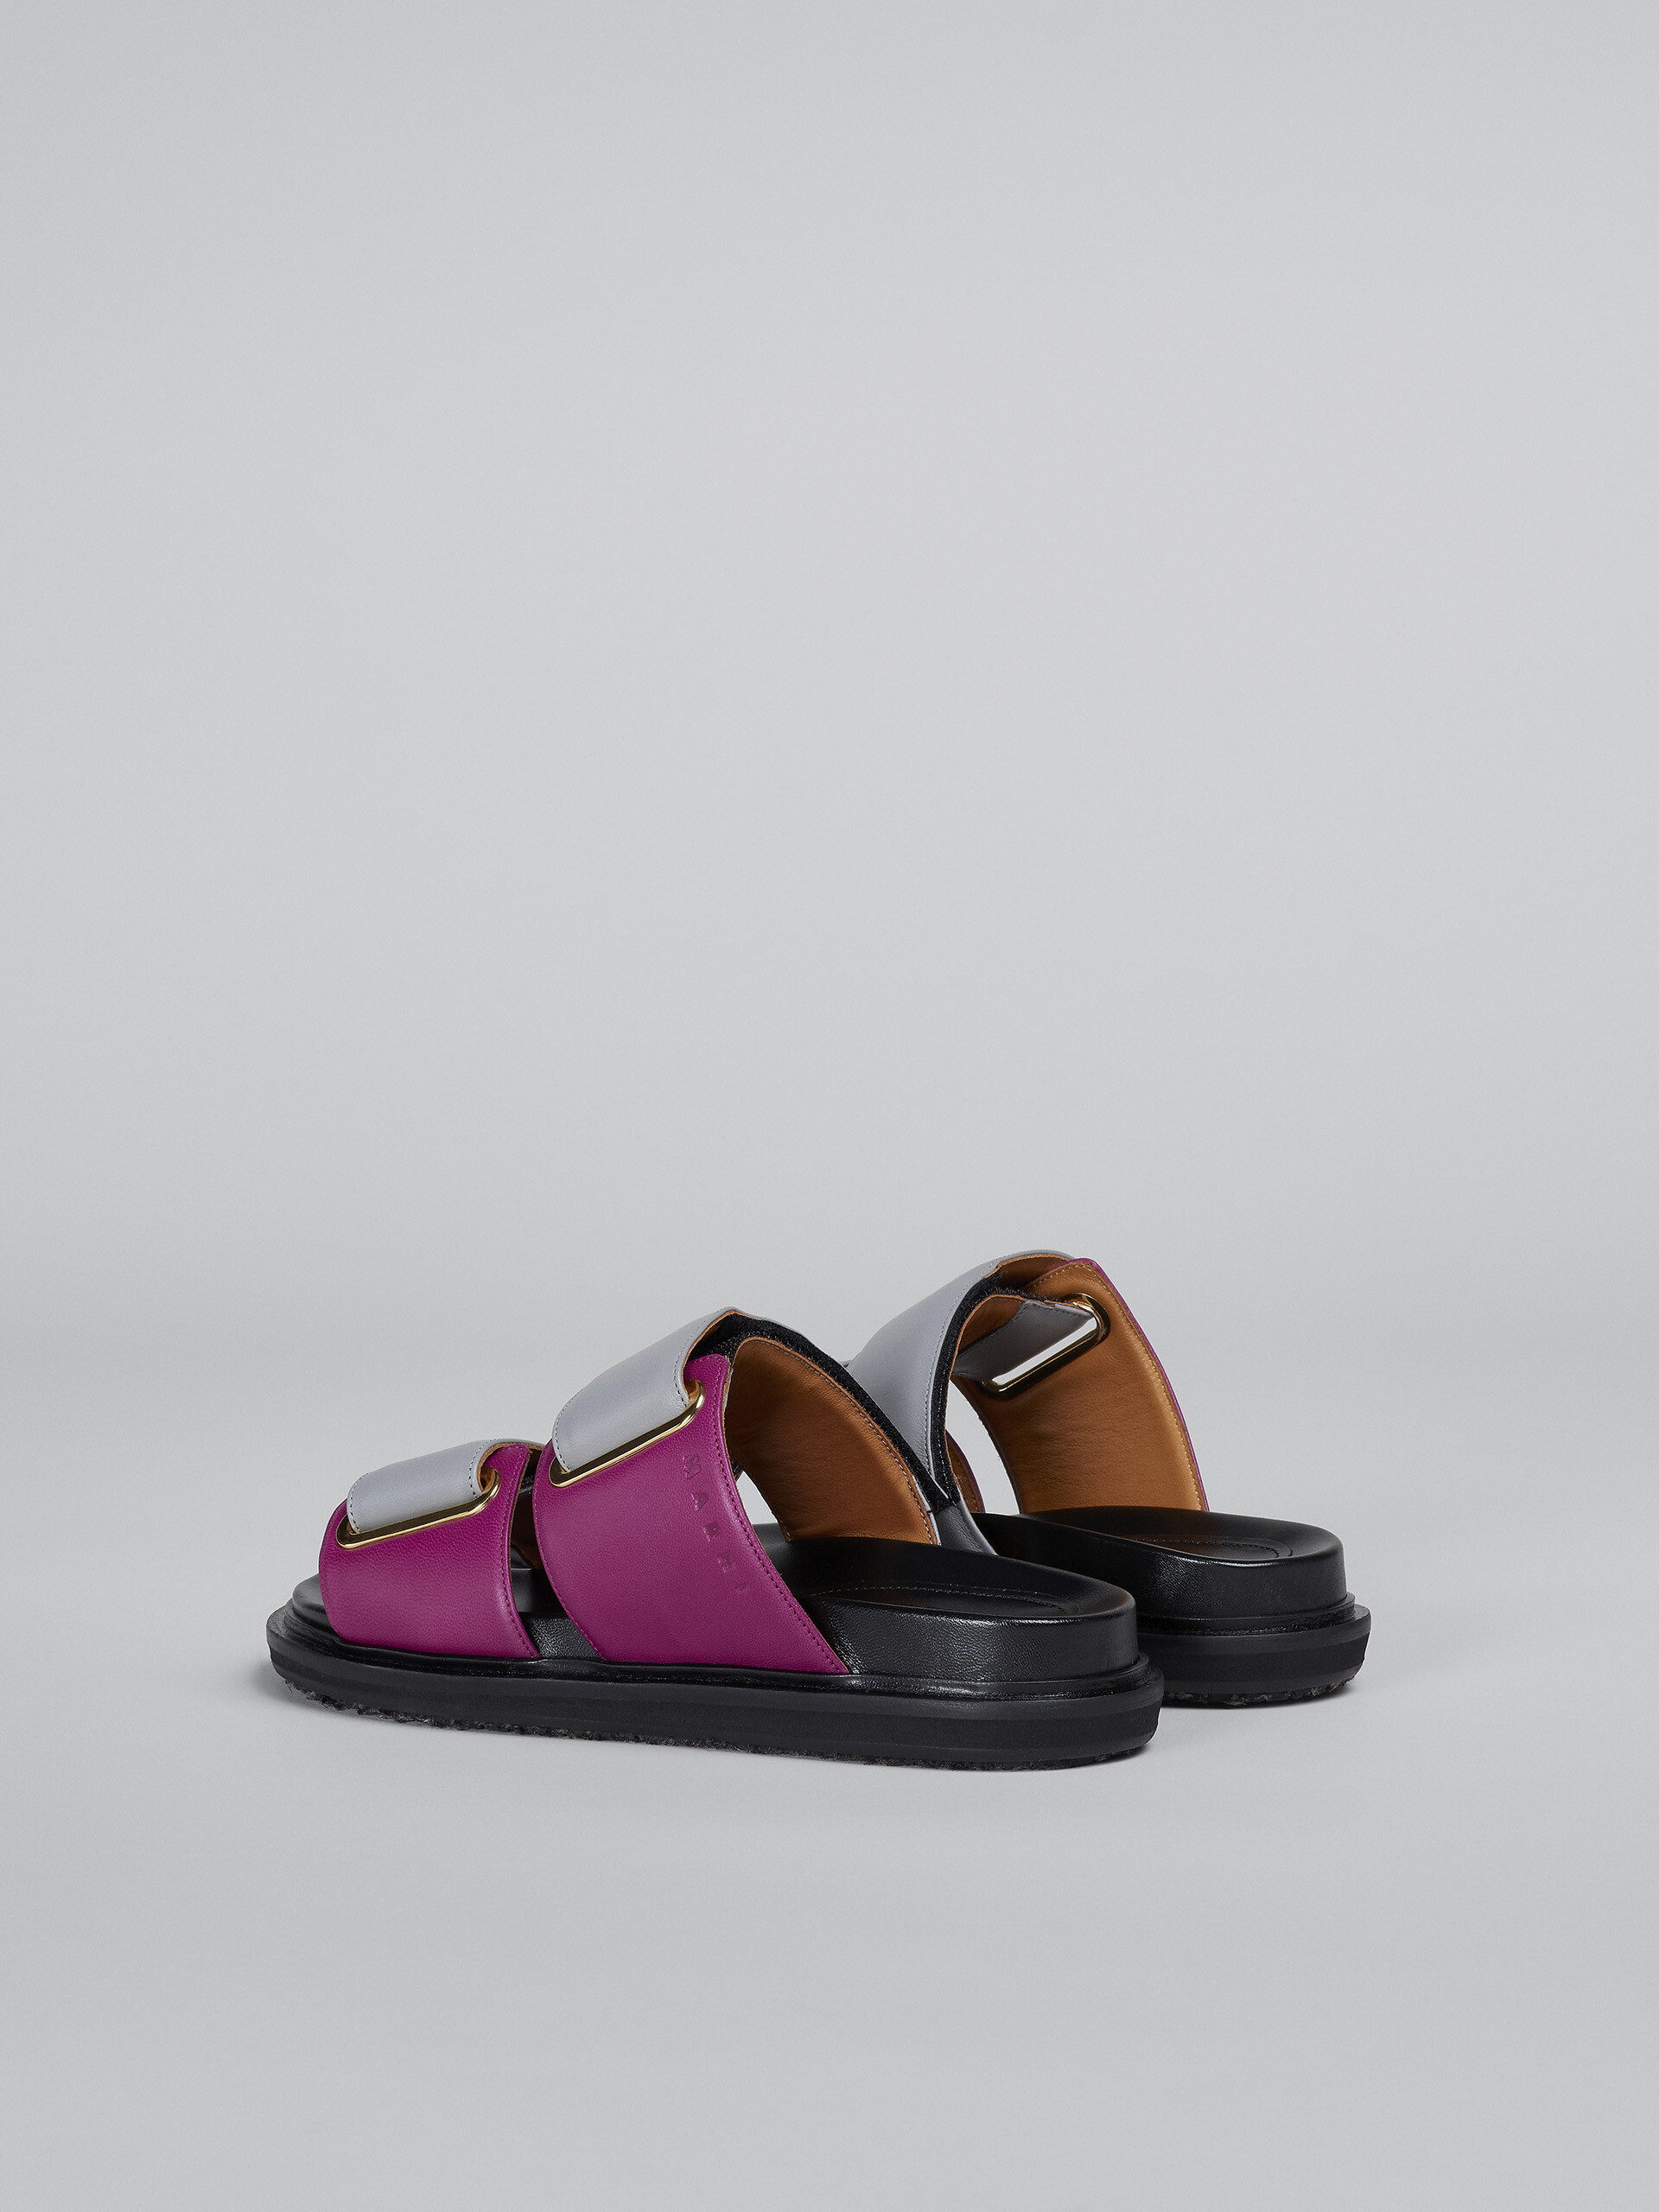 Grey and fucshia leather fussbett - Sandals - Image 3